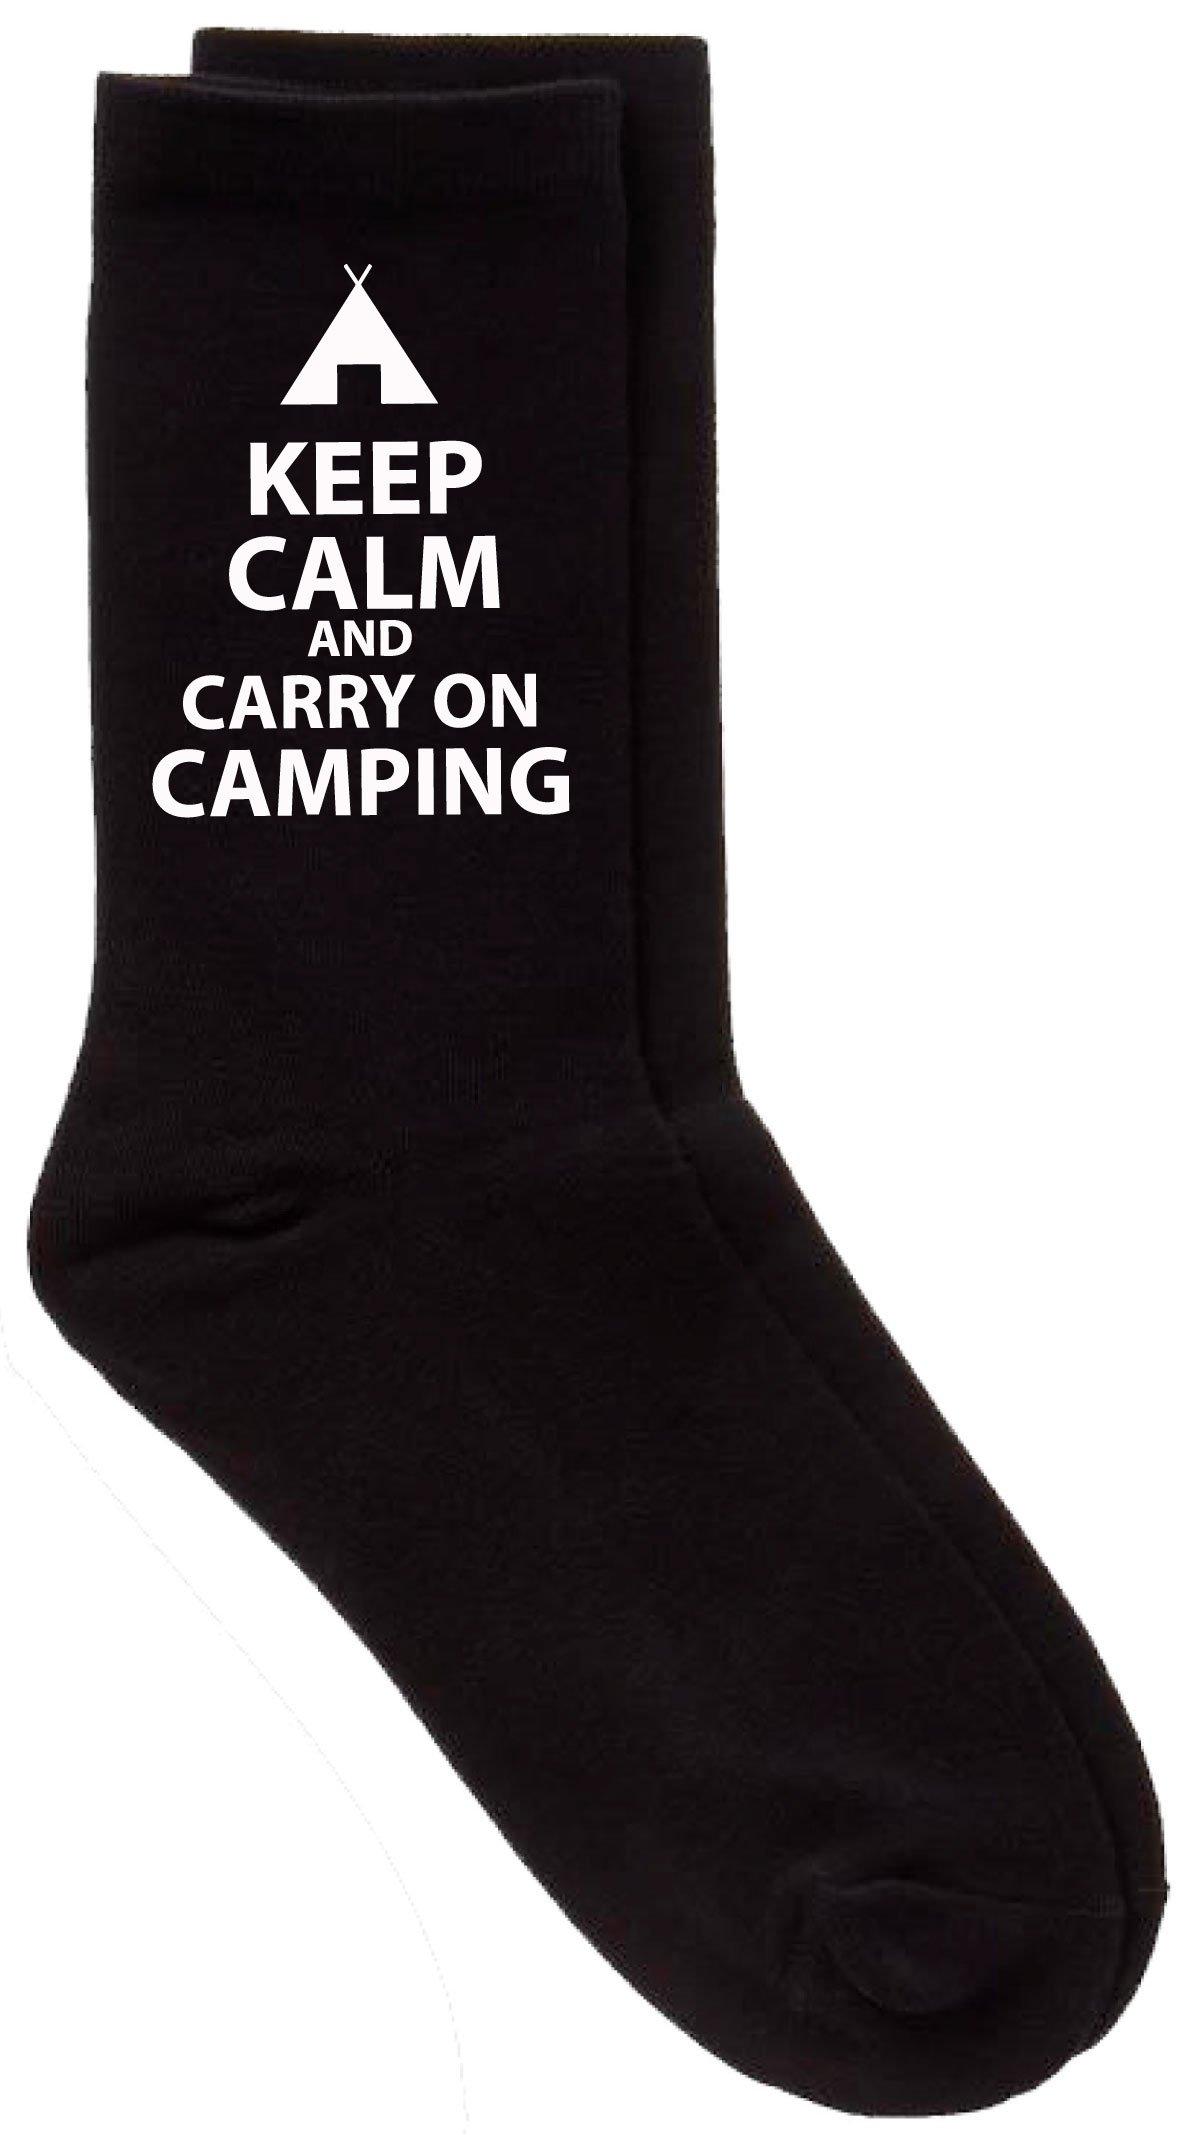 Keep Calm and Carry On Camping Black Calf Socks